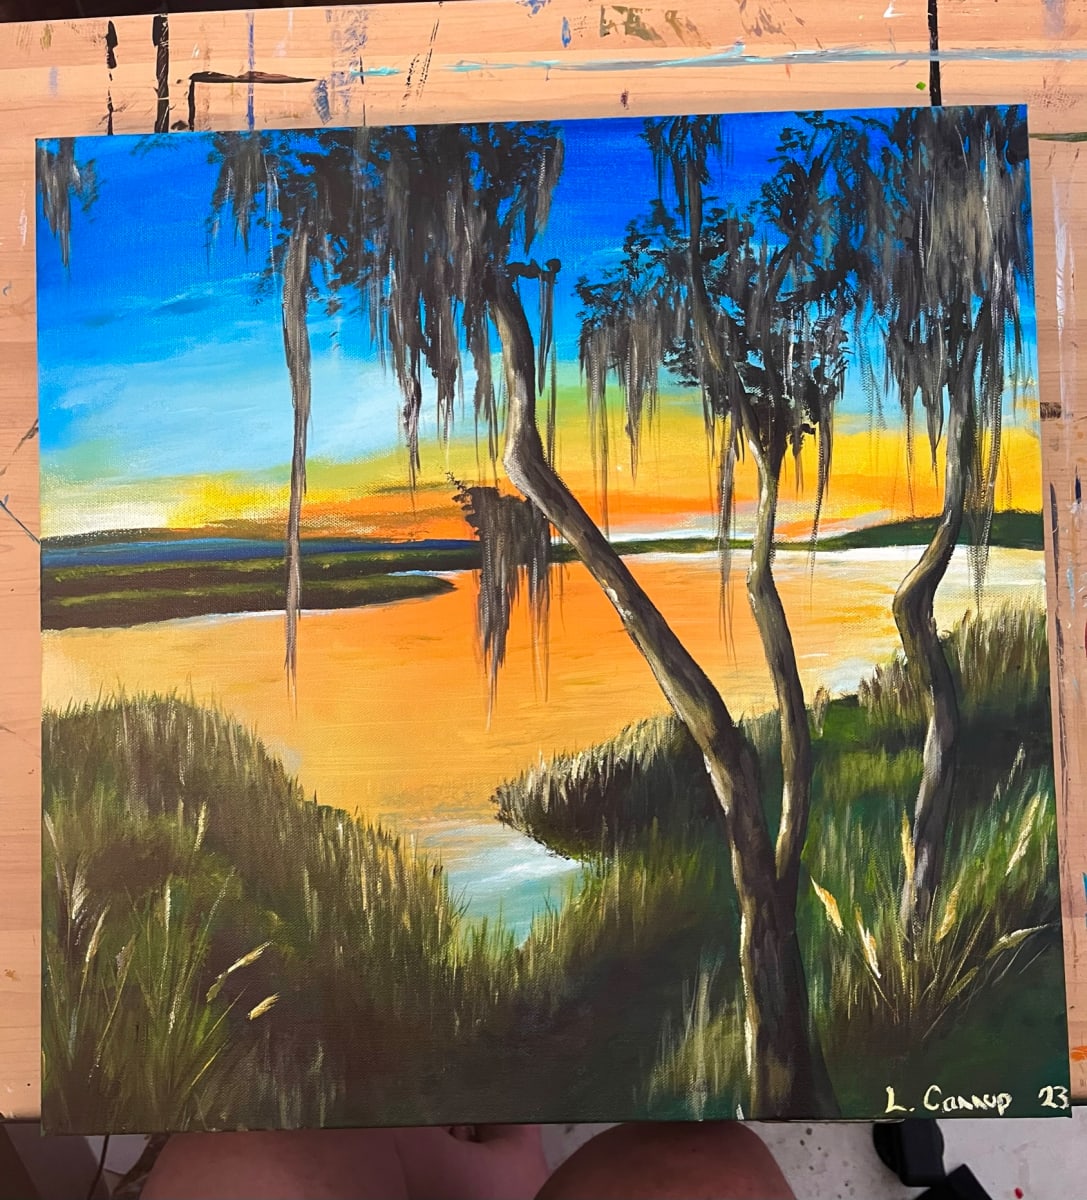 Bulow Creek (SOLD) by Linda Cannup  Image: (PENDING SALE)